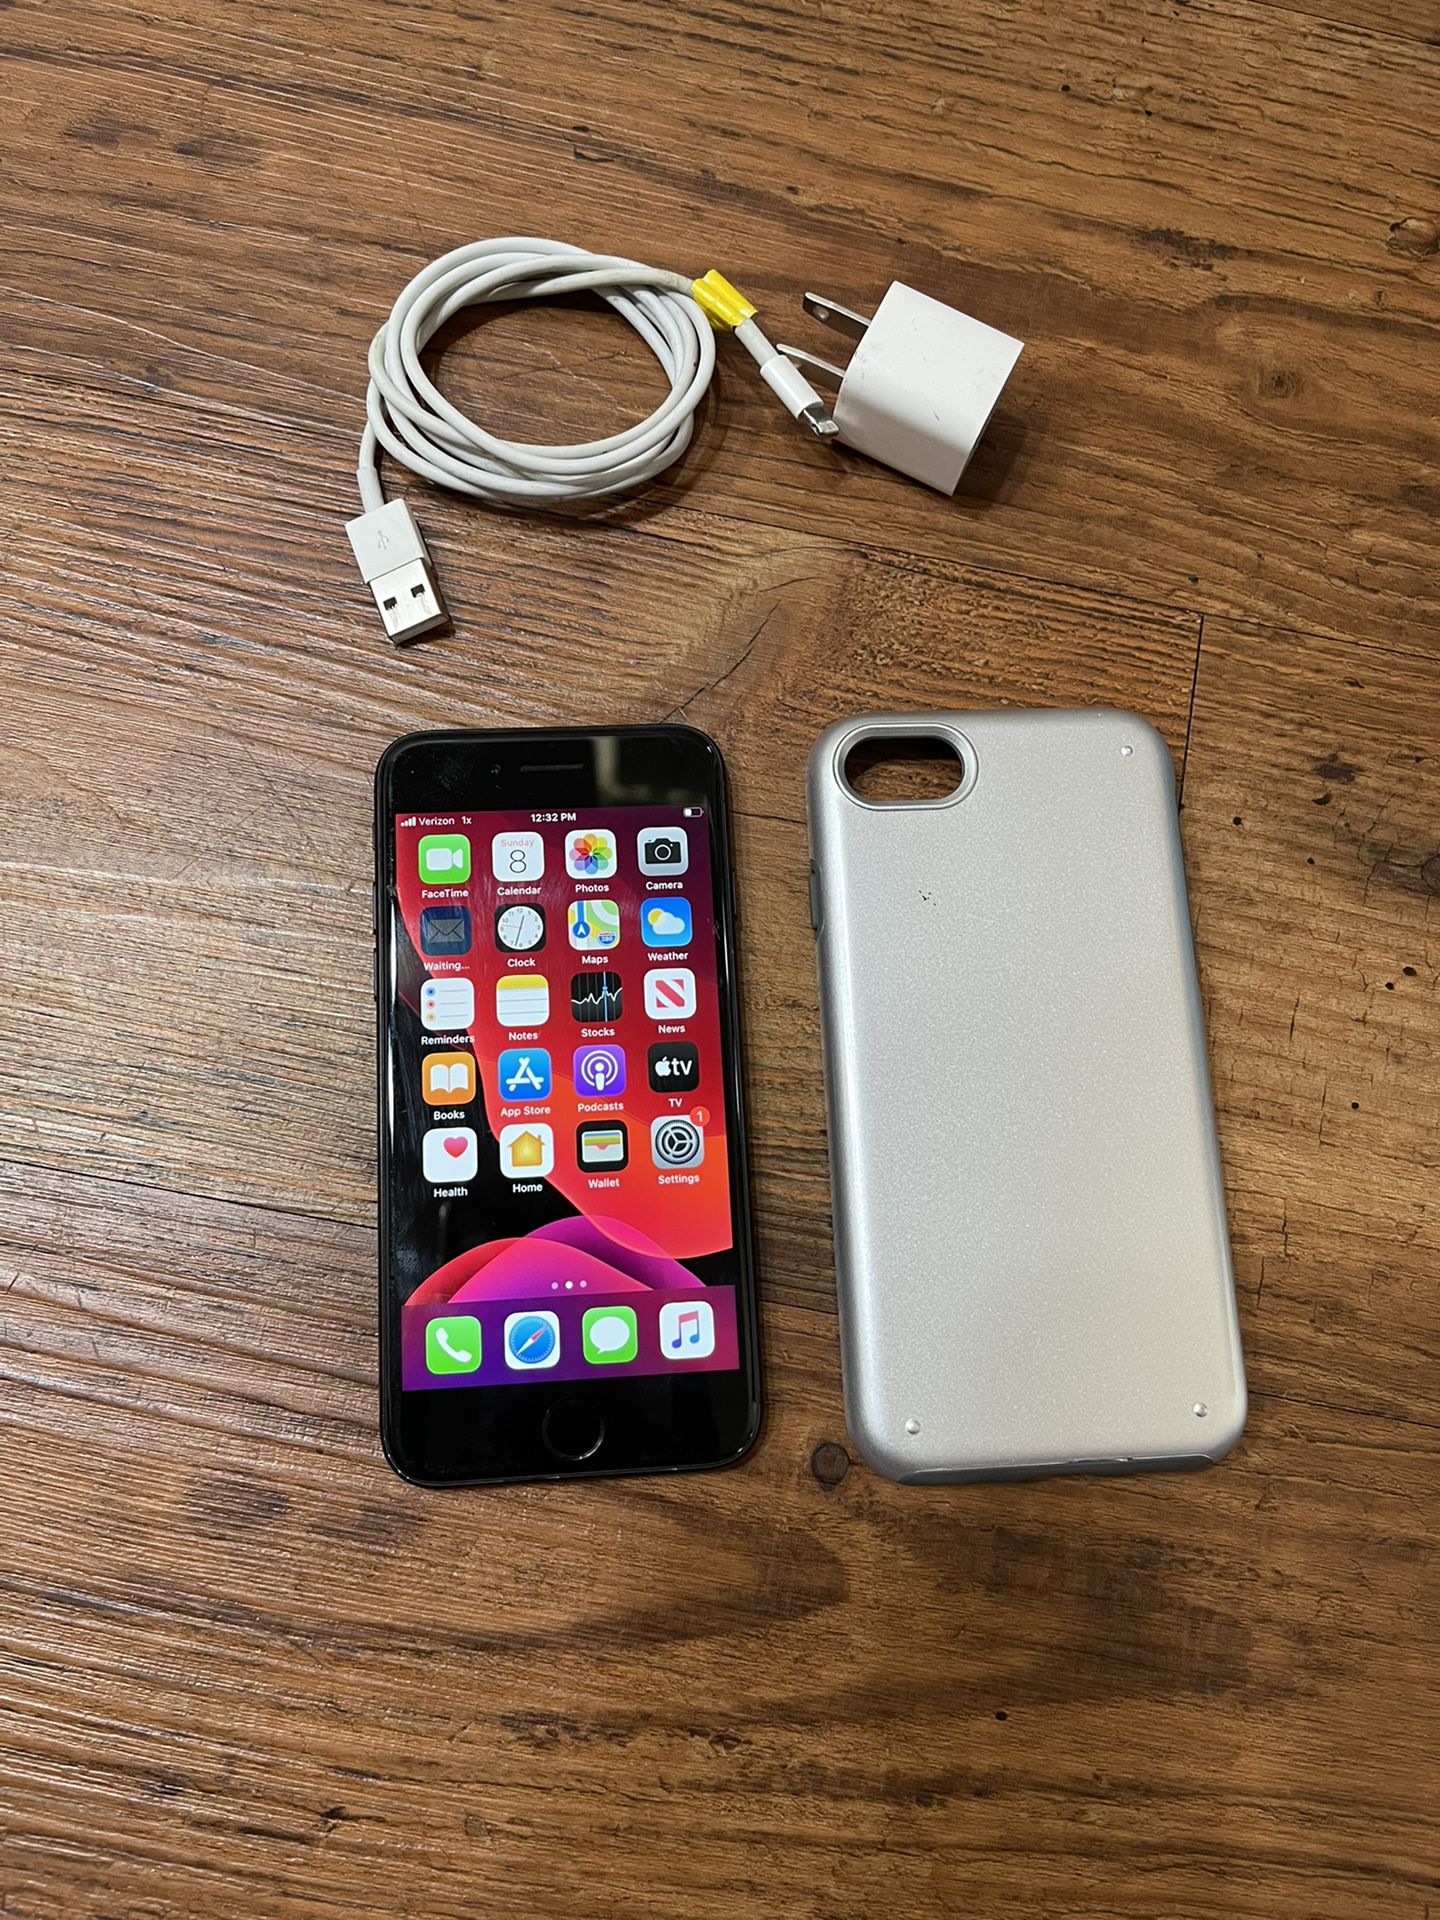 Apple iPhone 7 32gb Verizon Unlocked W/ Charger Firm On Price $150